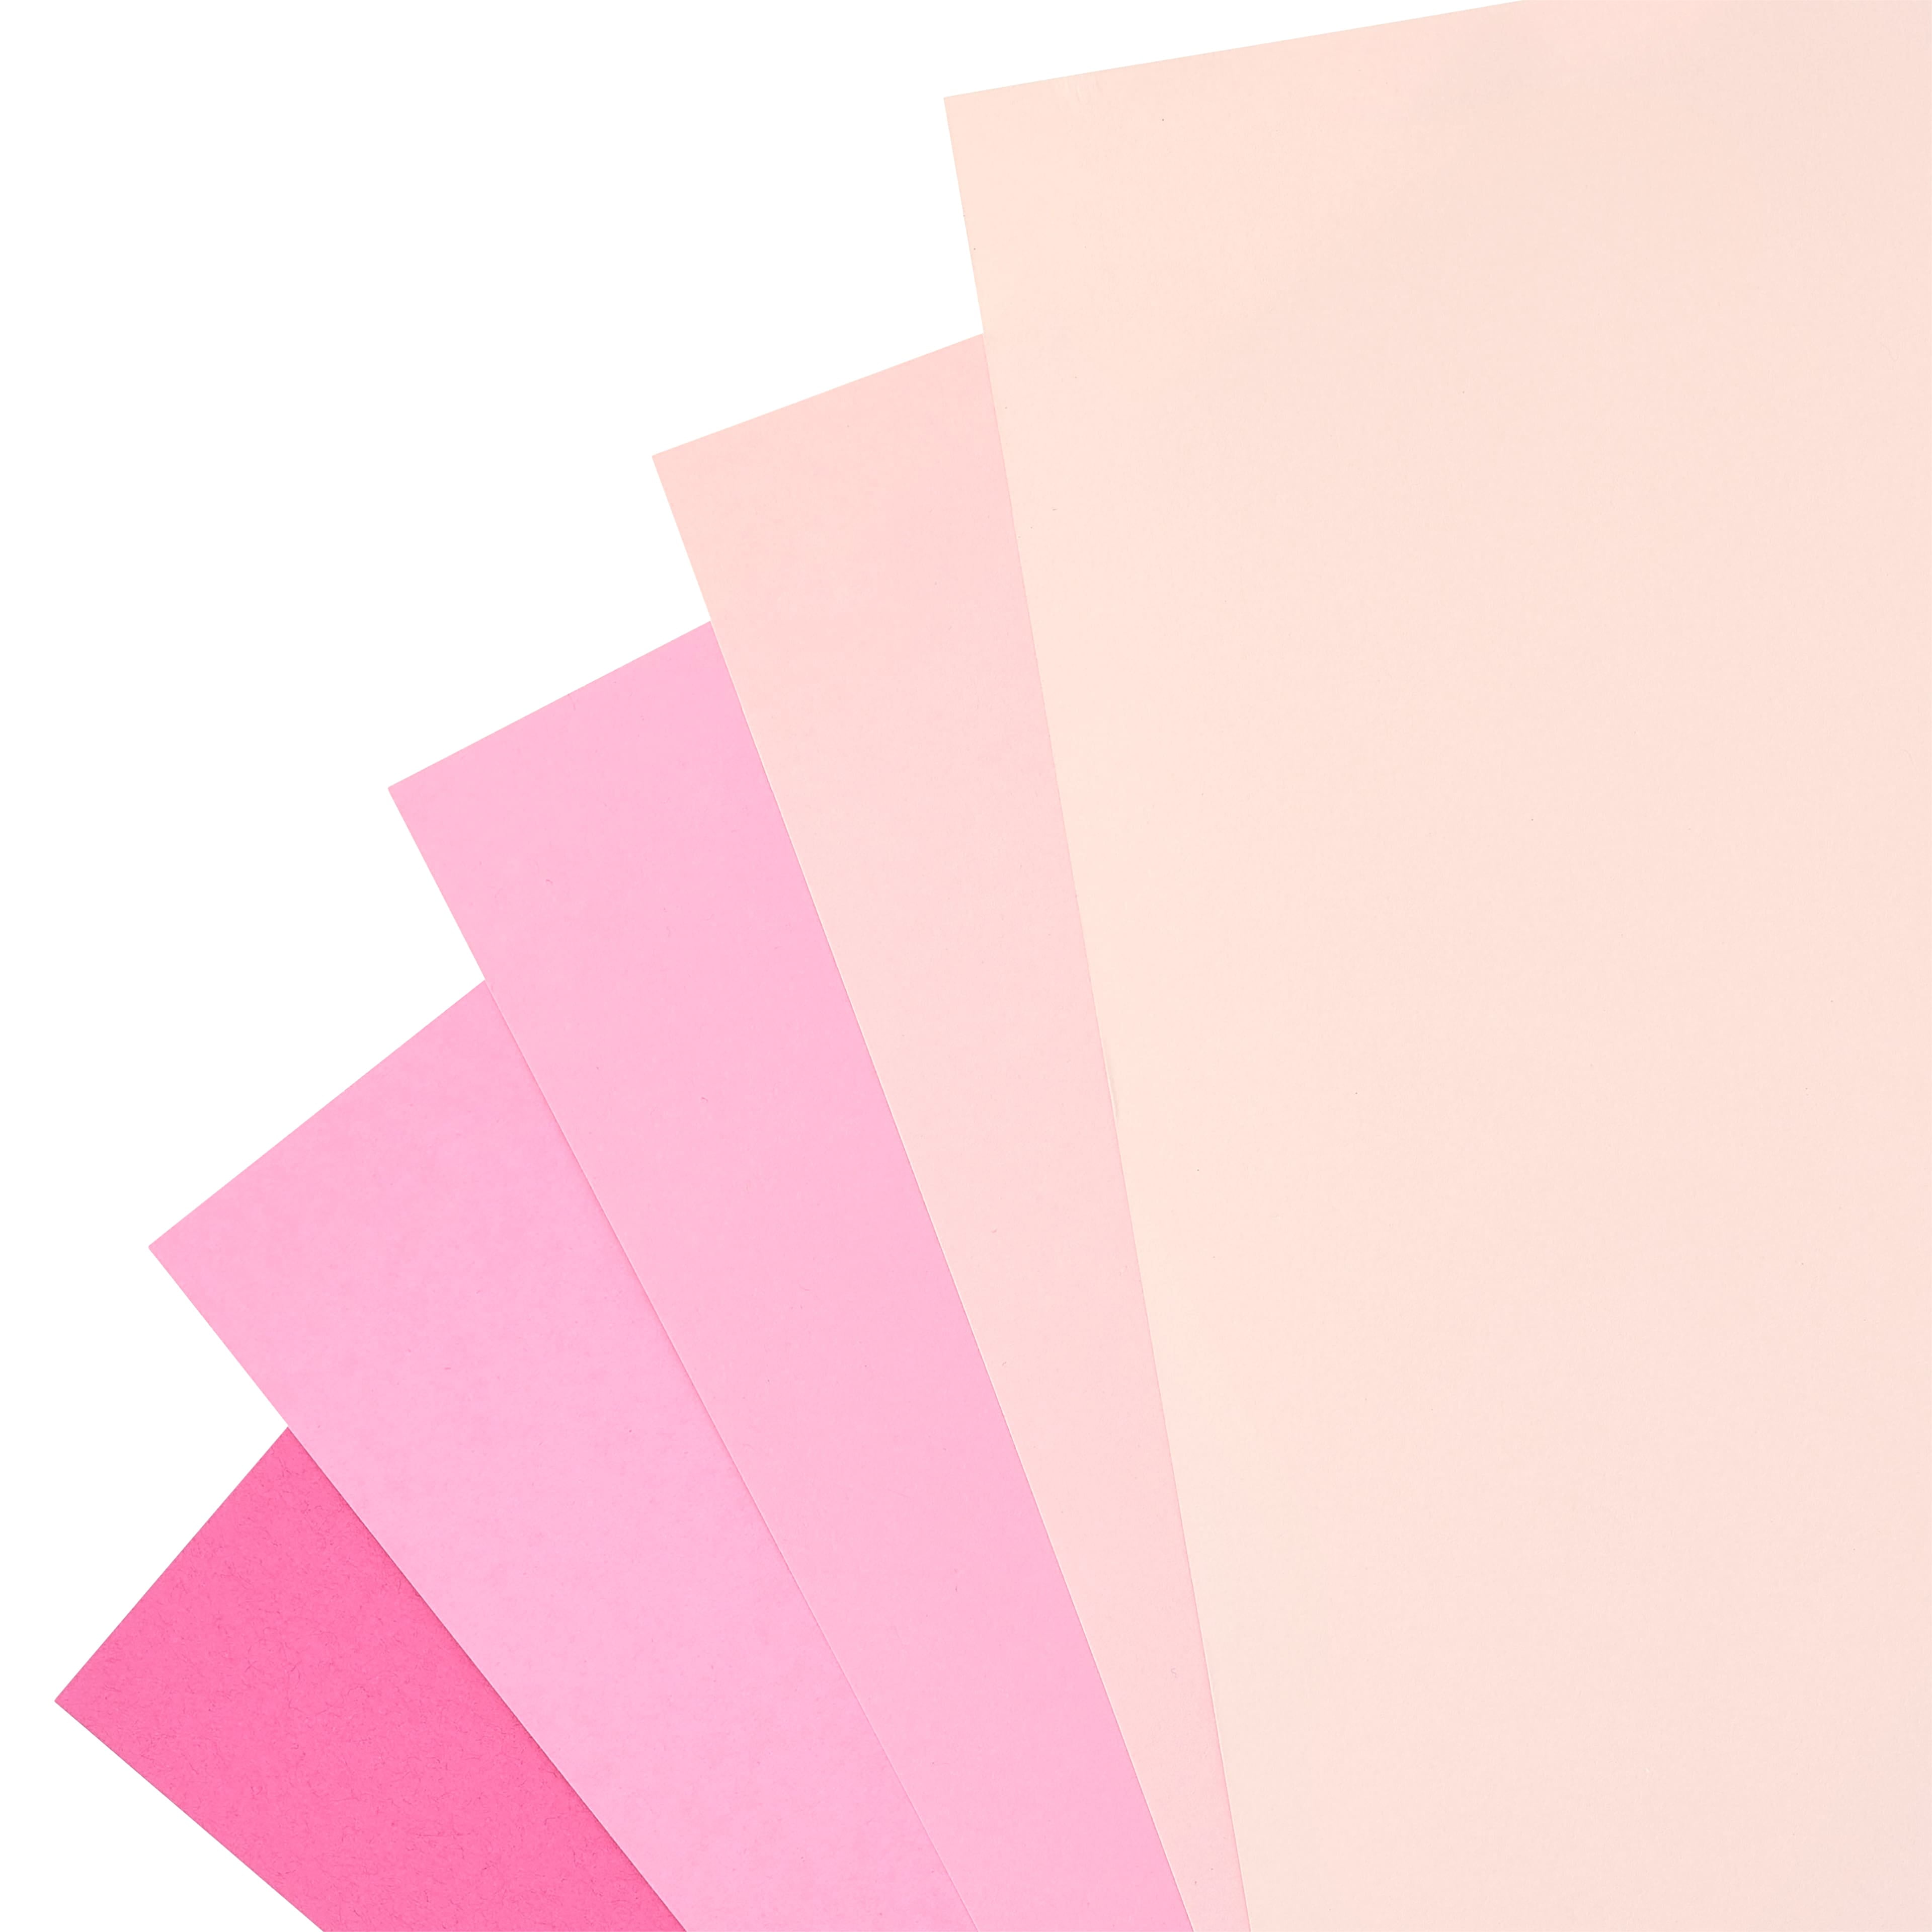 Twavang 25 Sheets Fuchsia Pink Cardstock Paper 8.5'' x 11'', 250gsm/92lb  Thick Paper for Scrapbook, Invitations, Printing and DIY Cards